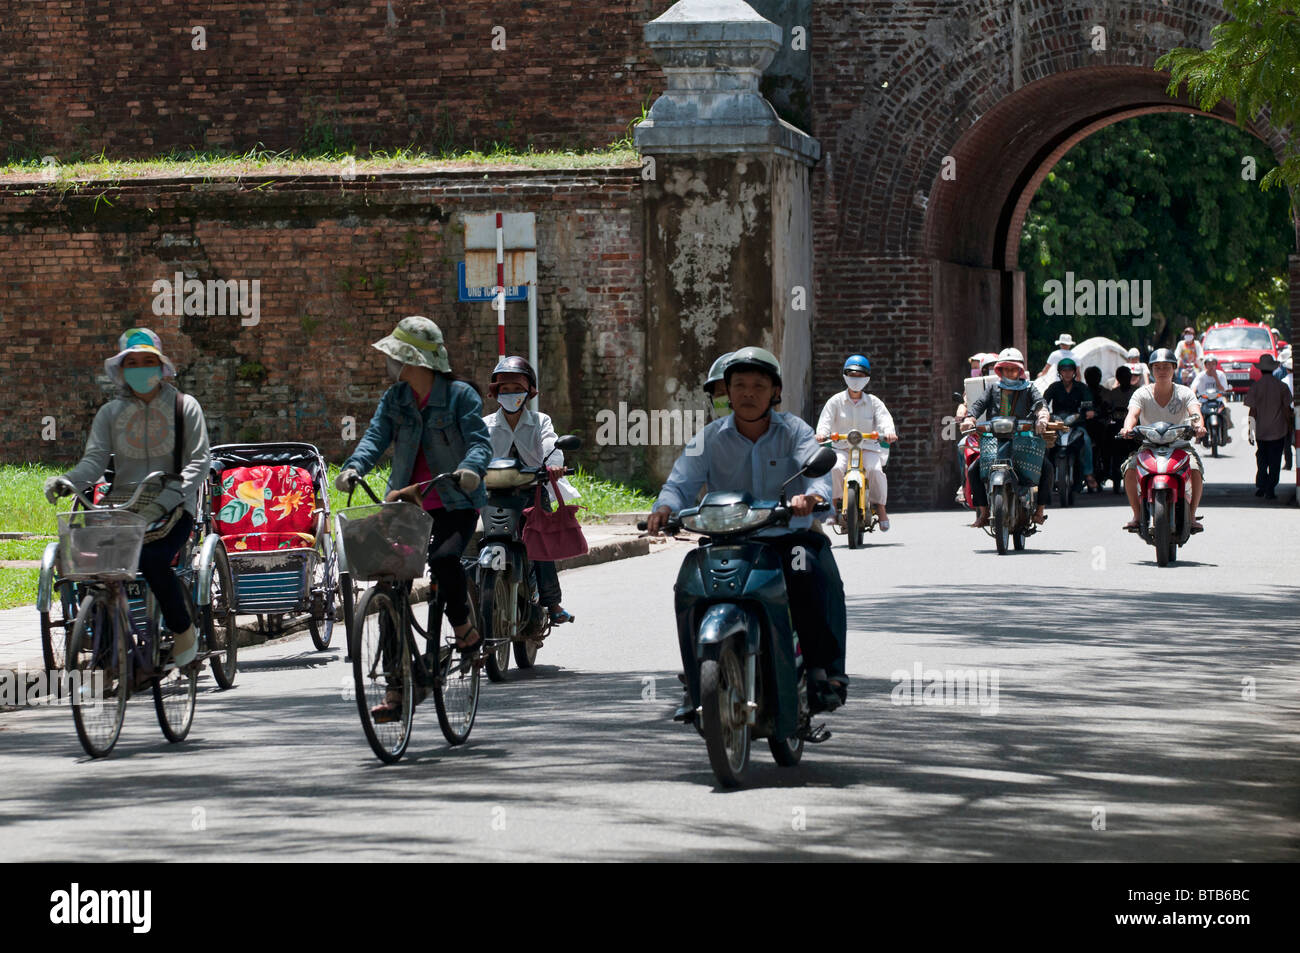 Busy Traffic at the Ngan Gate by the Entrance to the Imperial City of Hue, Vietnam Stock Photo